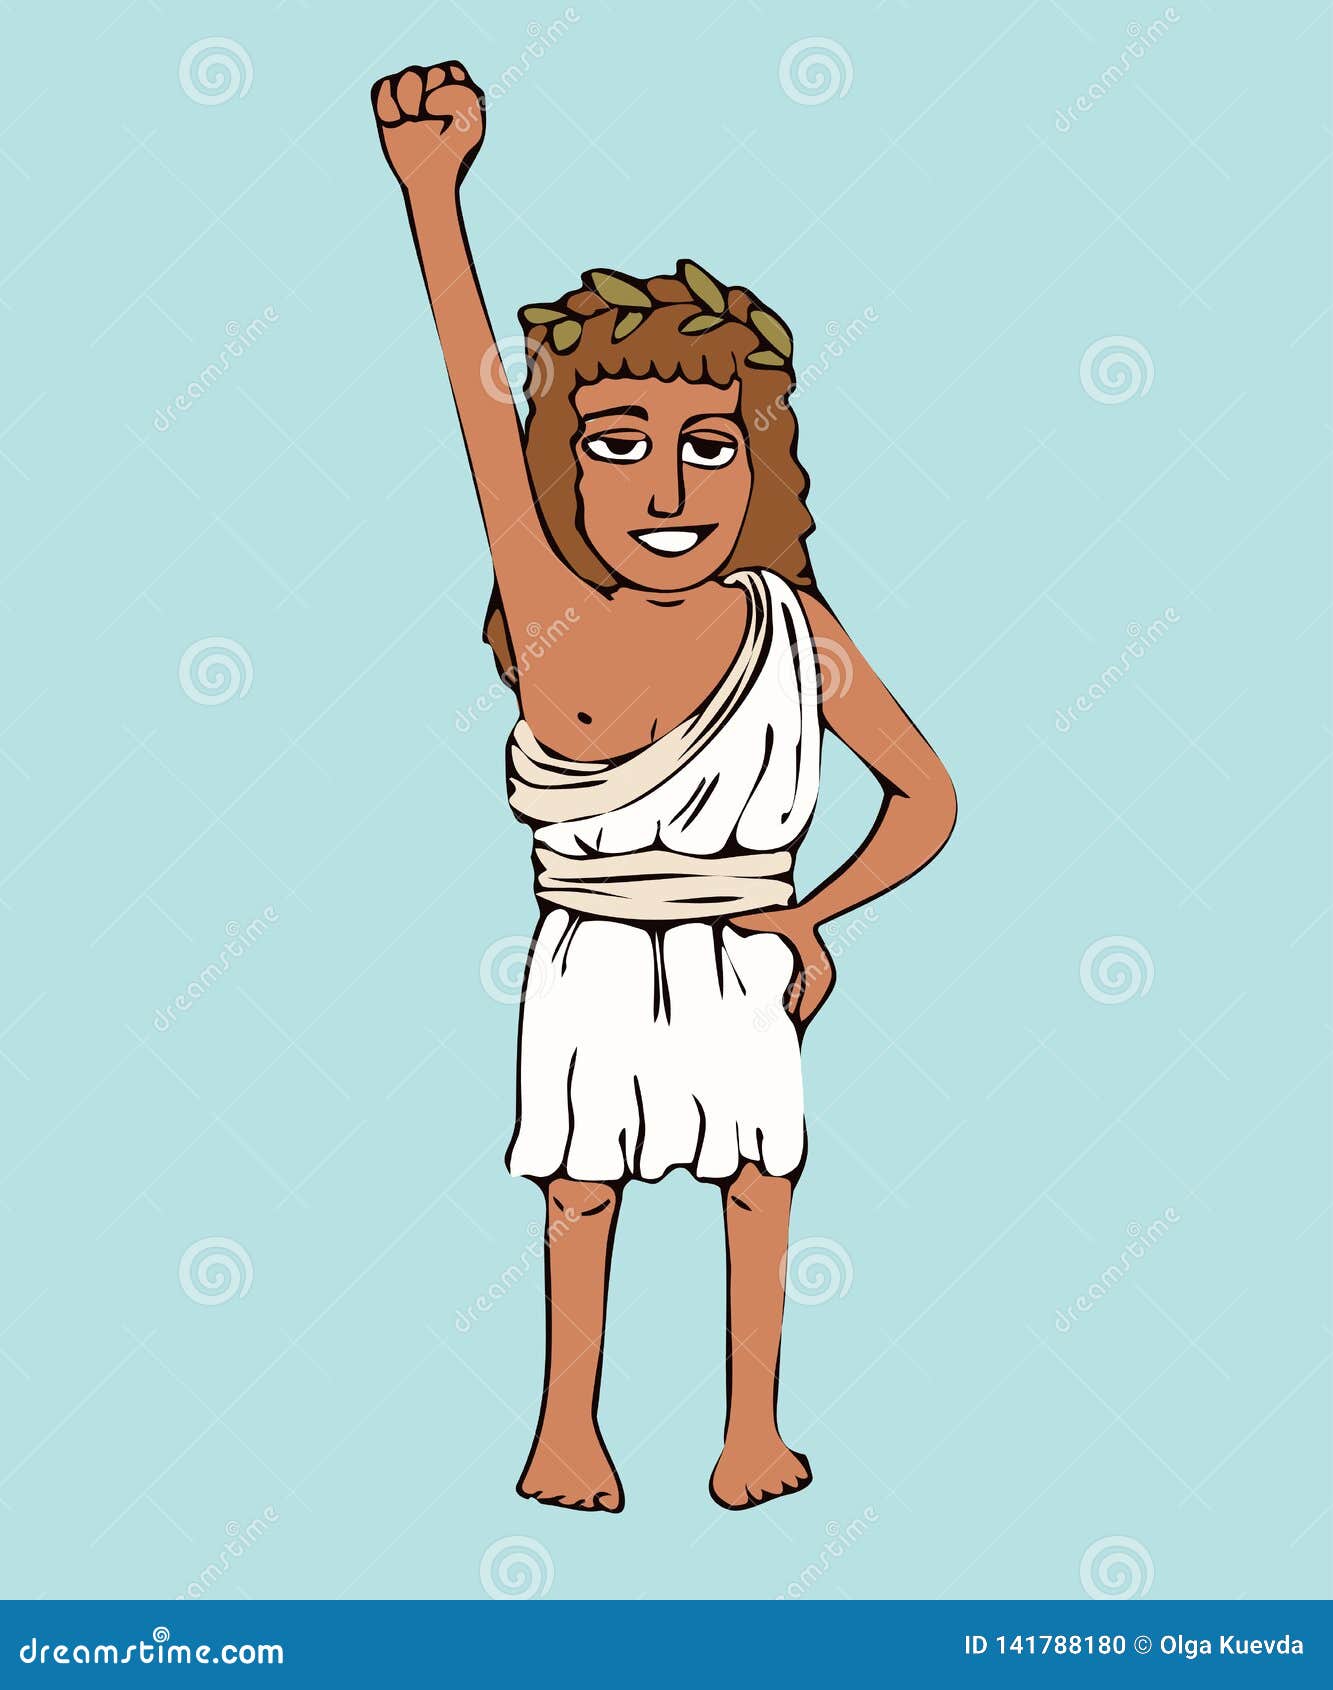 ancient greek girl athlete in olive wreath and short chiton